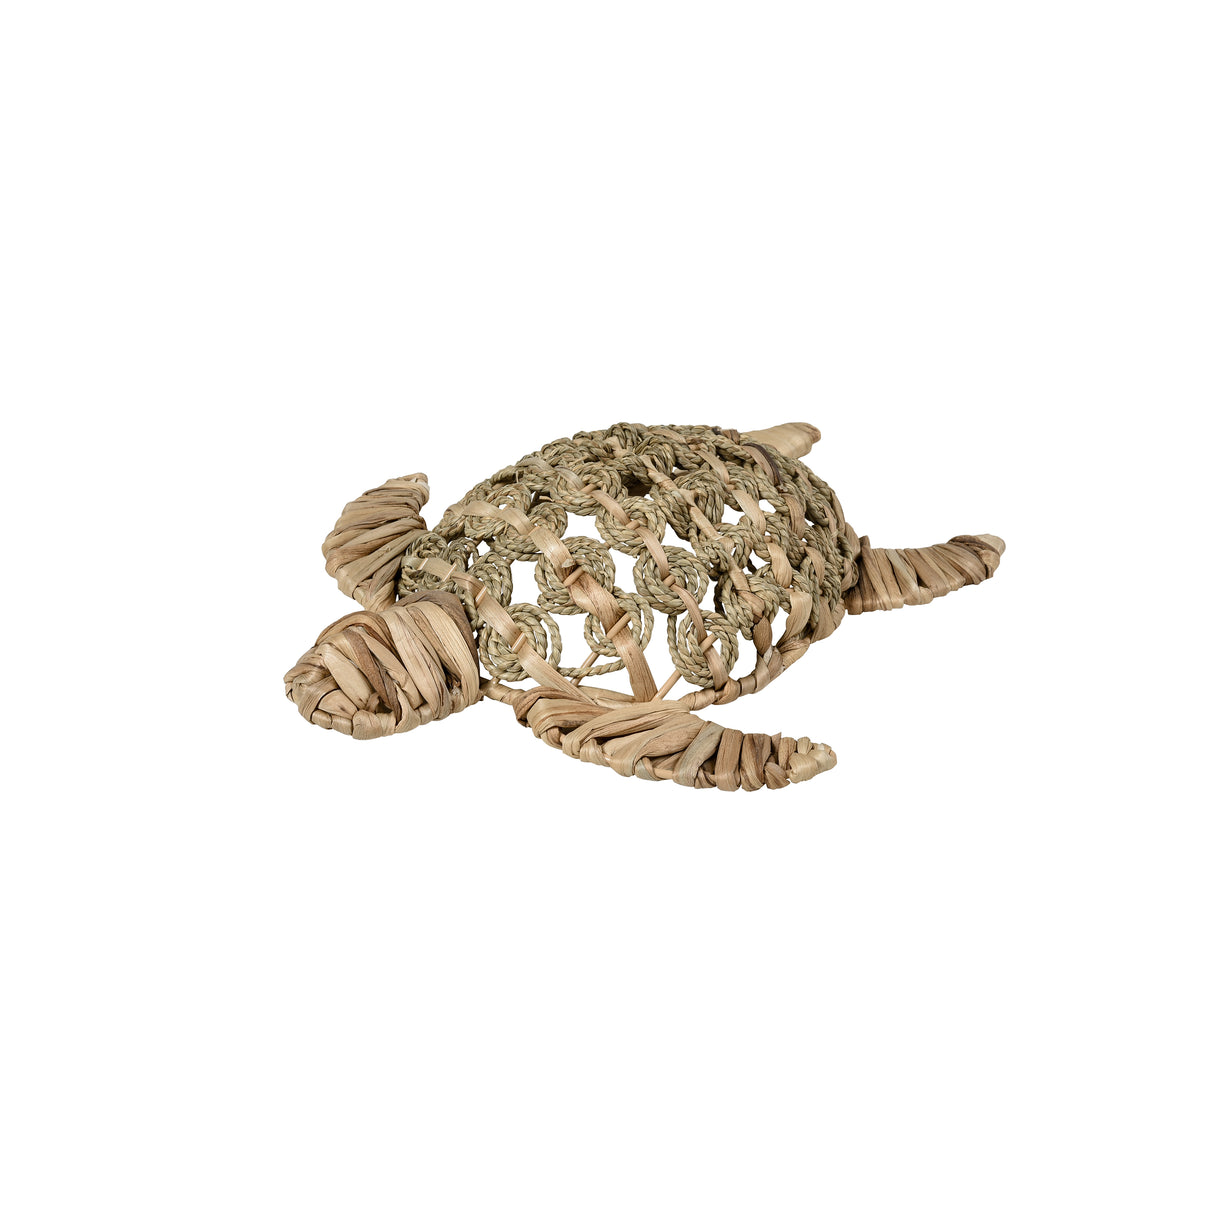 Elk S0067-11273 Ridley Turtle Object - Small Natural